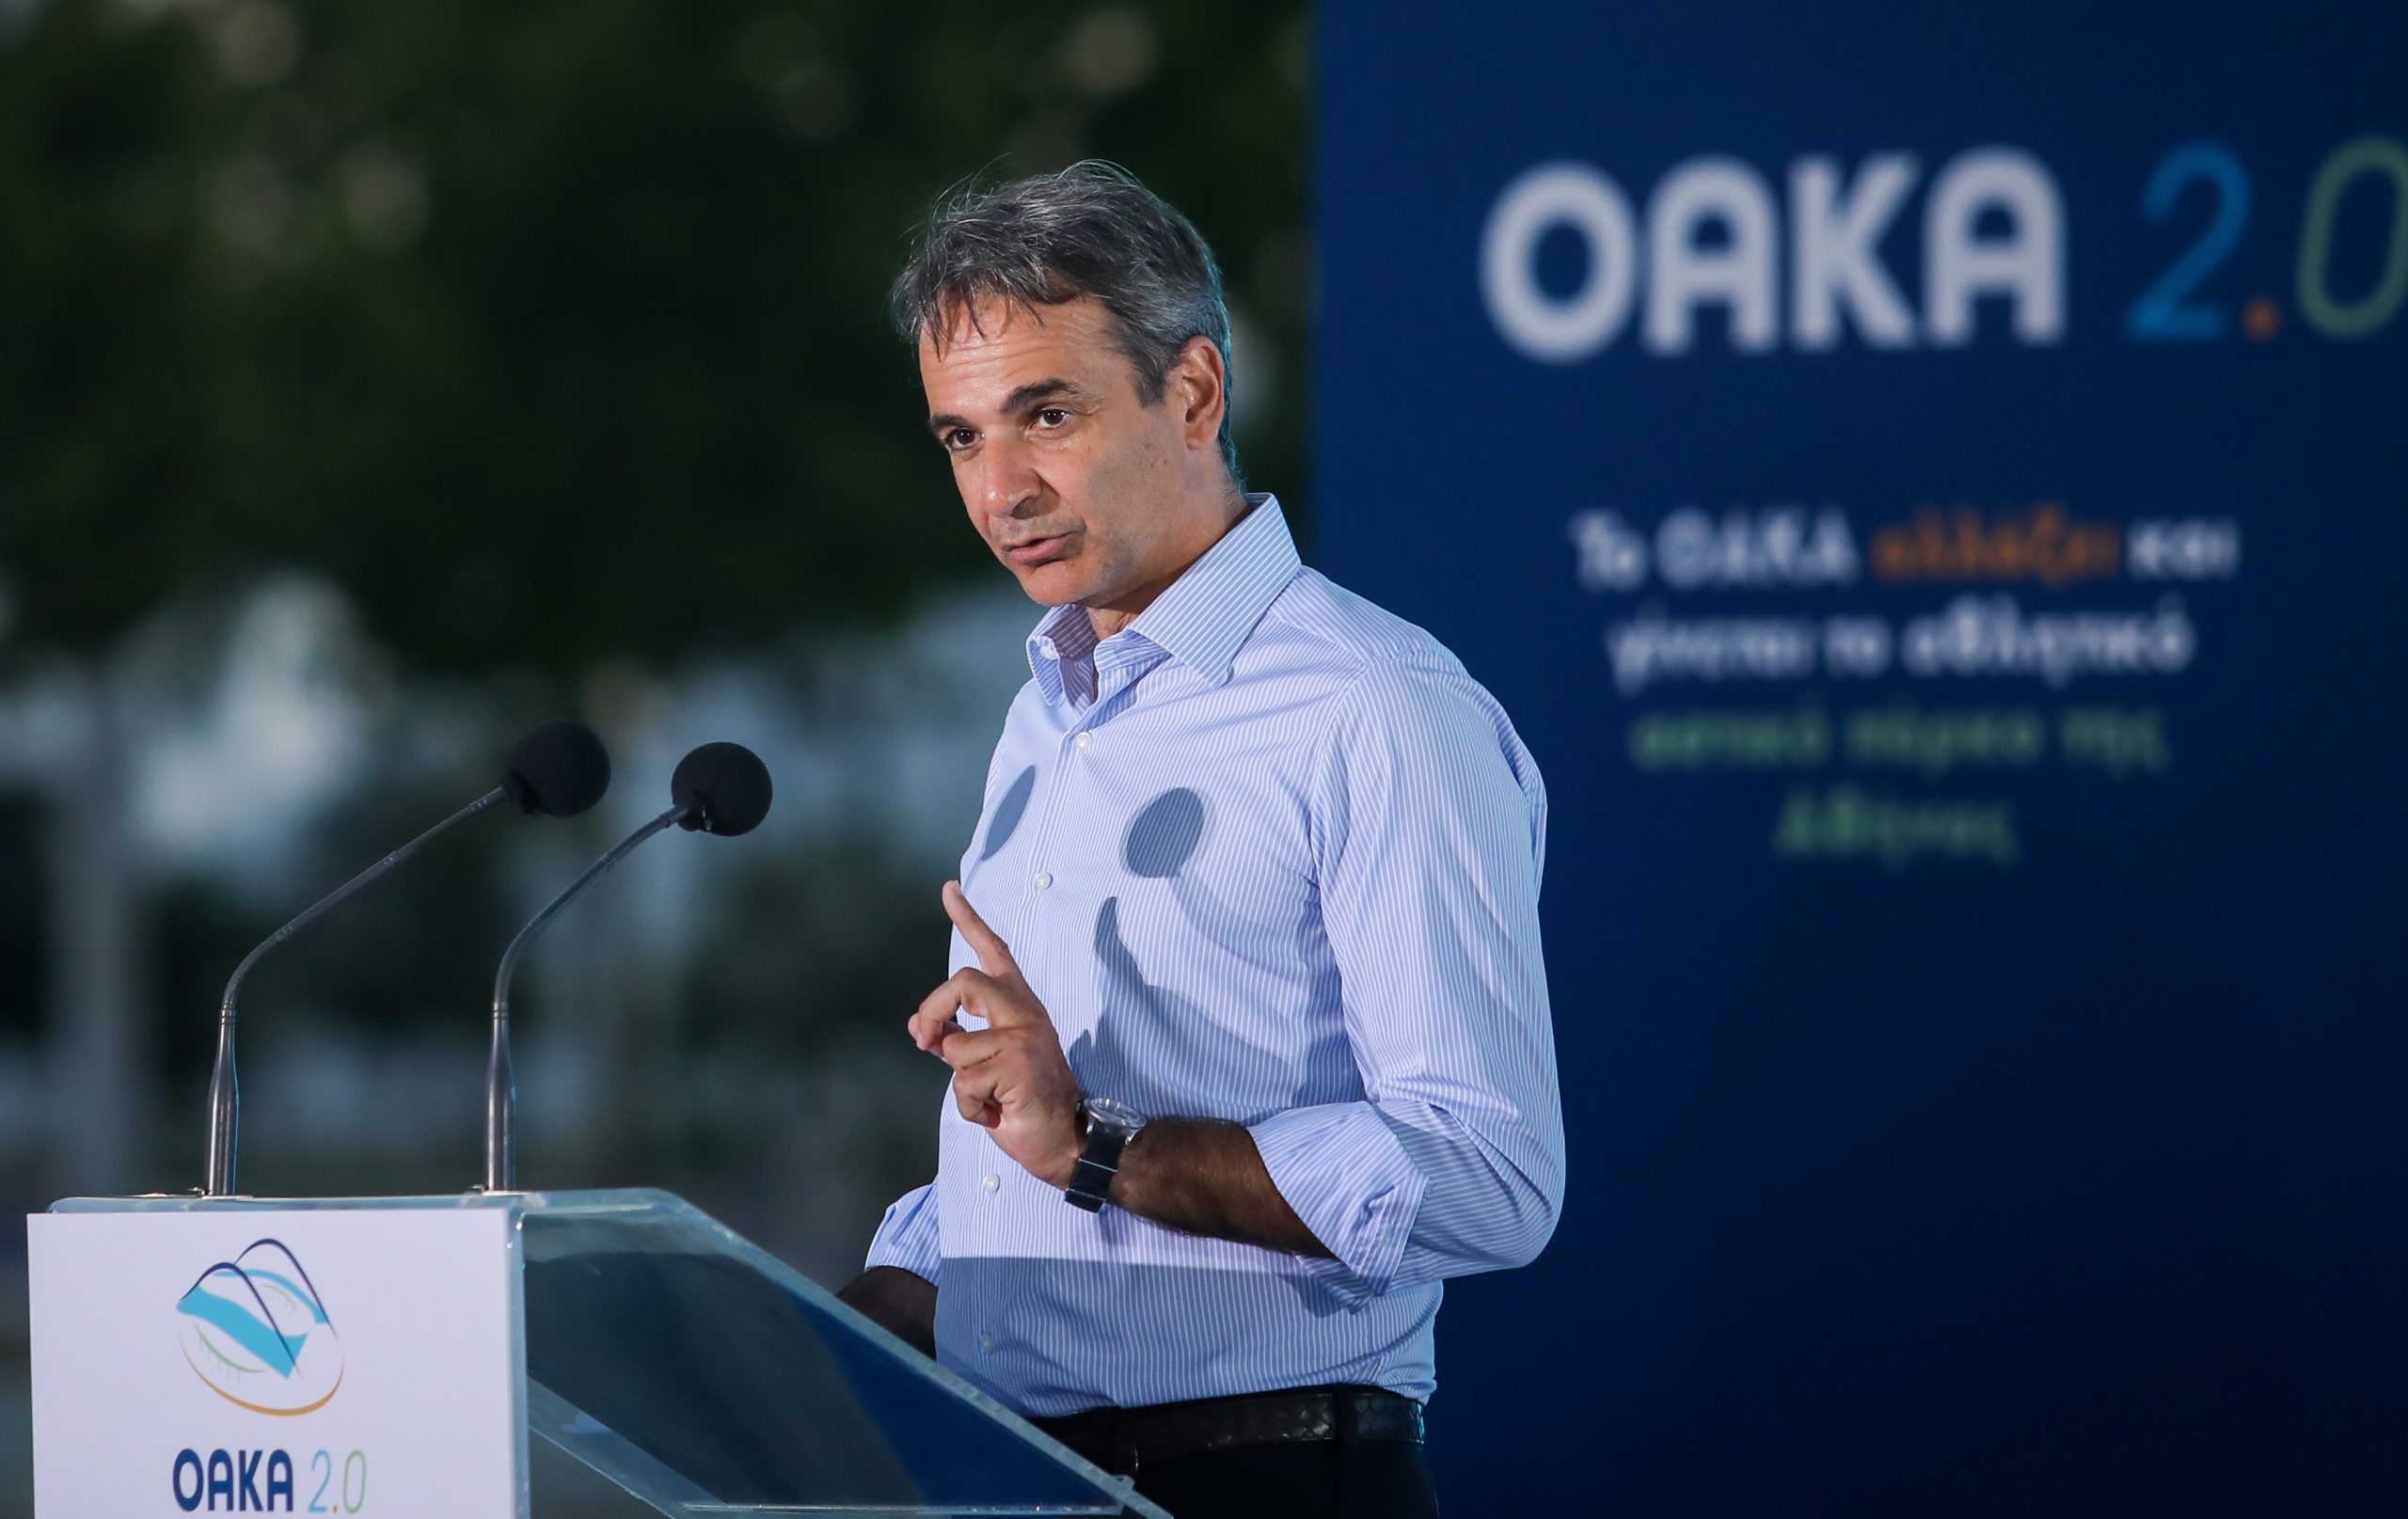 Freedom Pass: 120,000 new appointments – Mitsotakis urges youths 18-25 to vaccinate